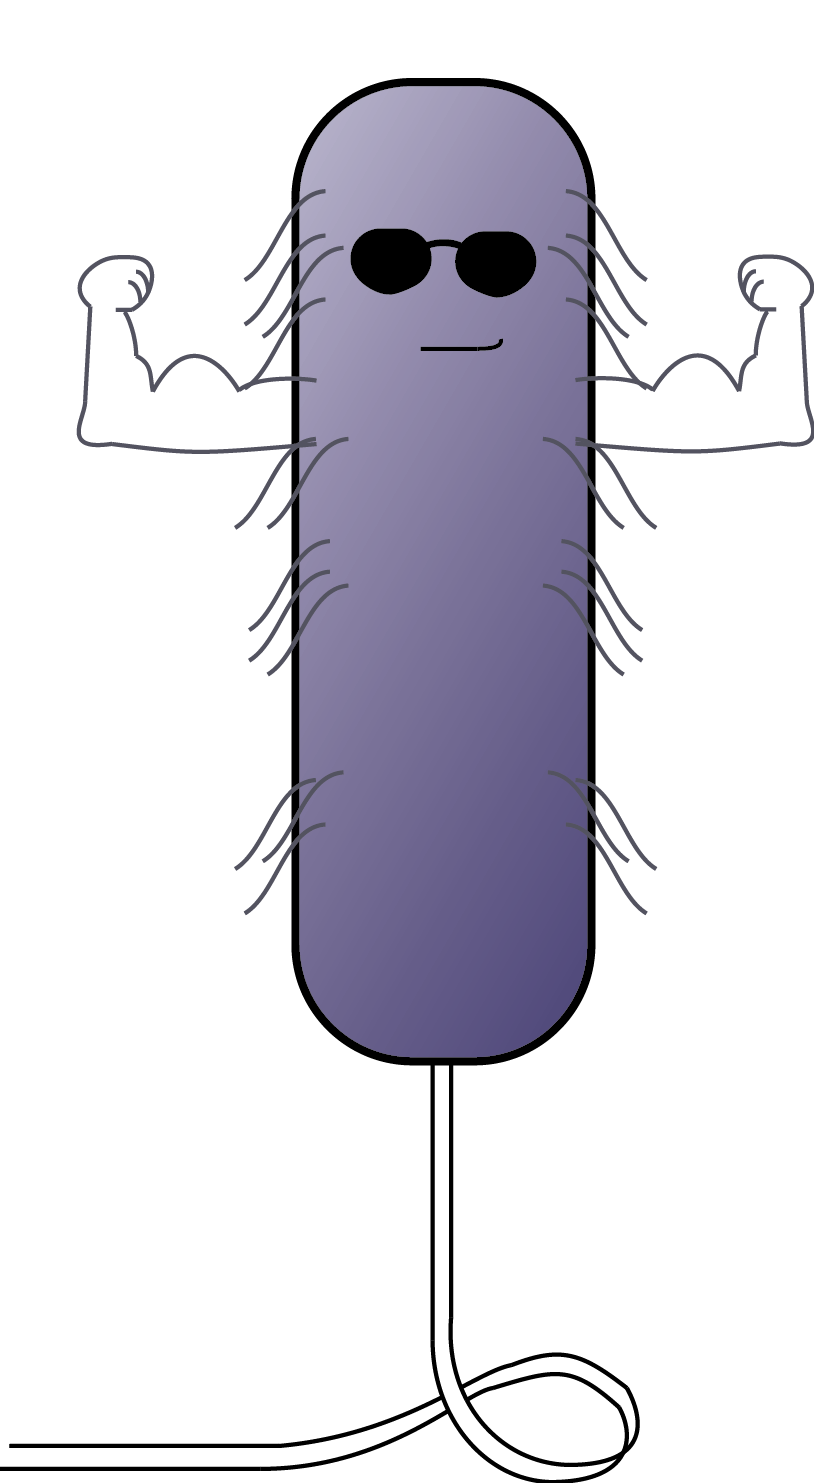 Bacteria clipart e coli. From benign to lethal